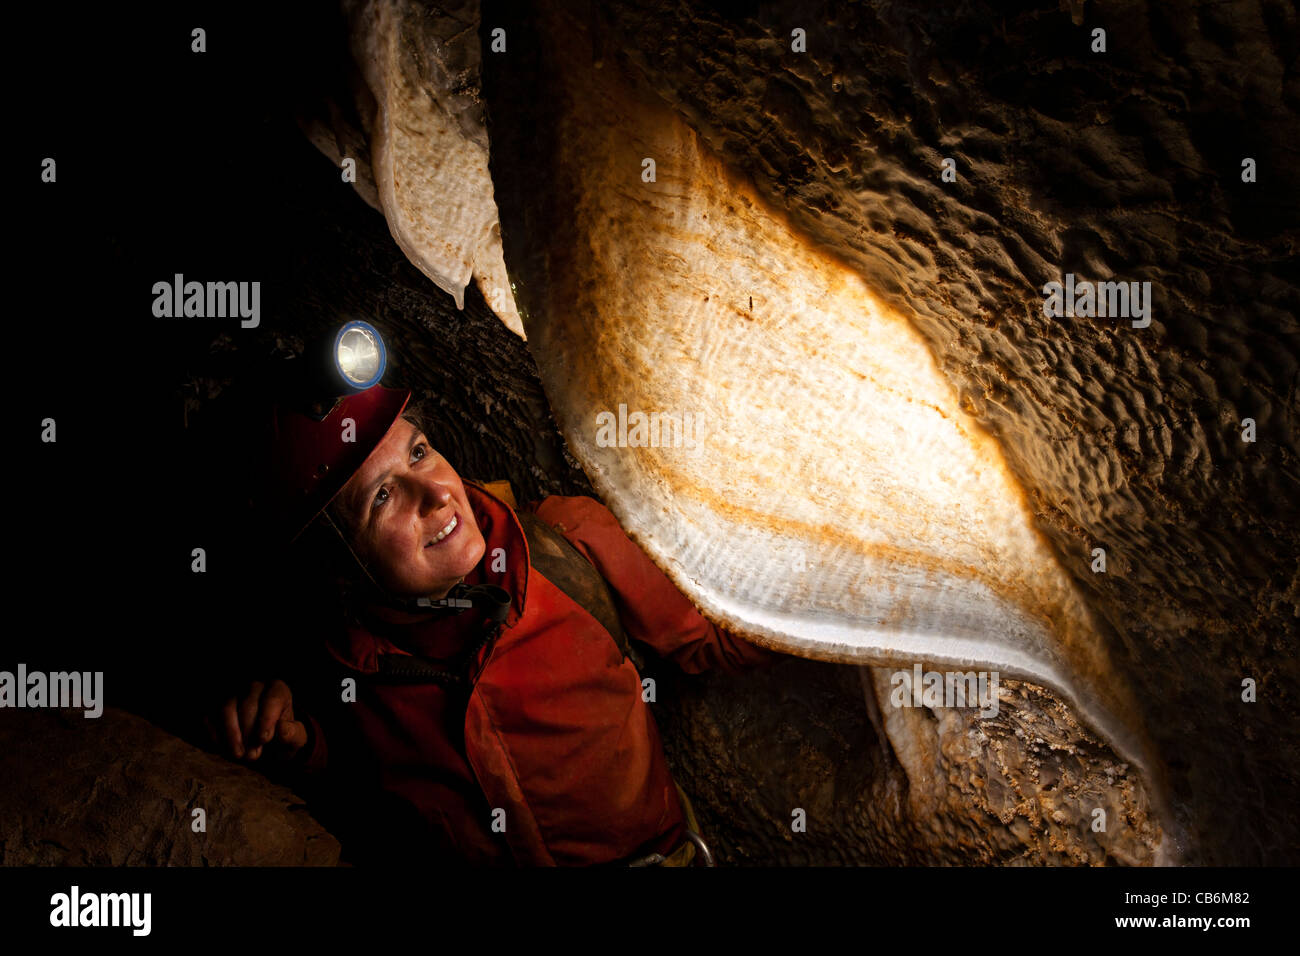 Female caver with stalactite curtain in French cave Stock Photo